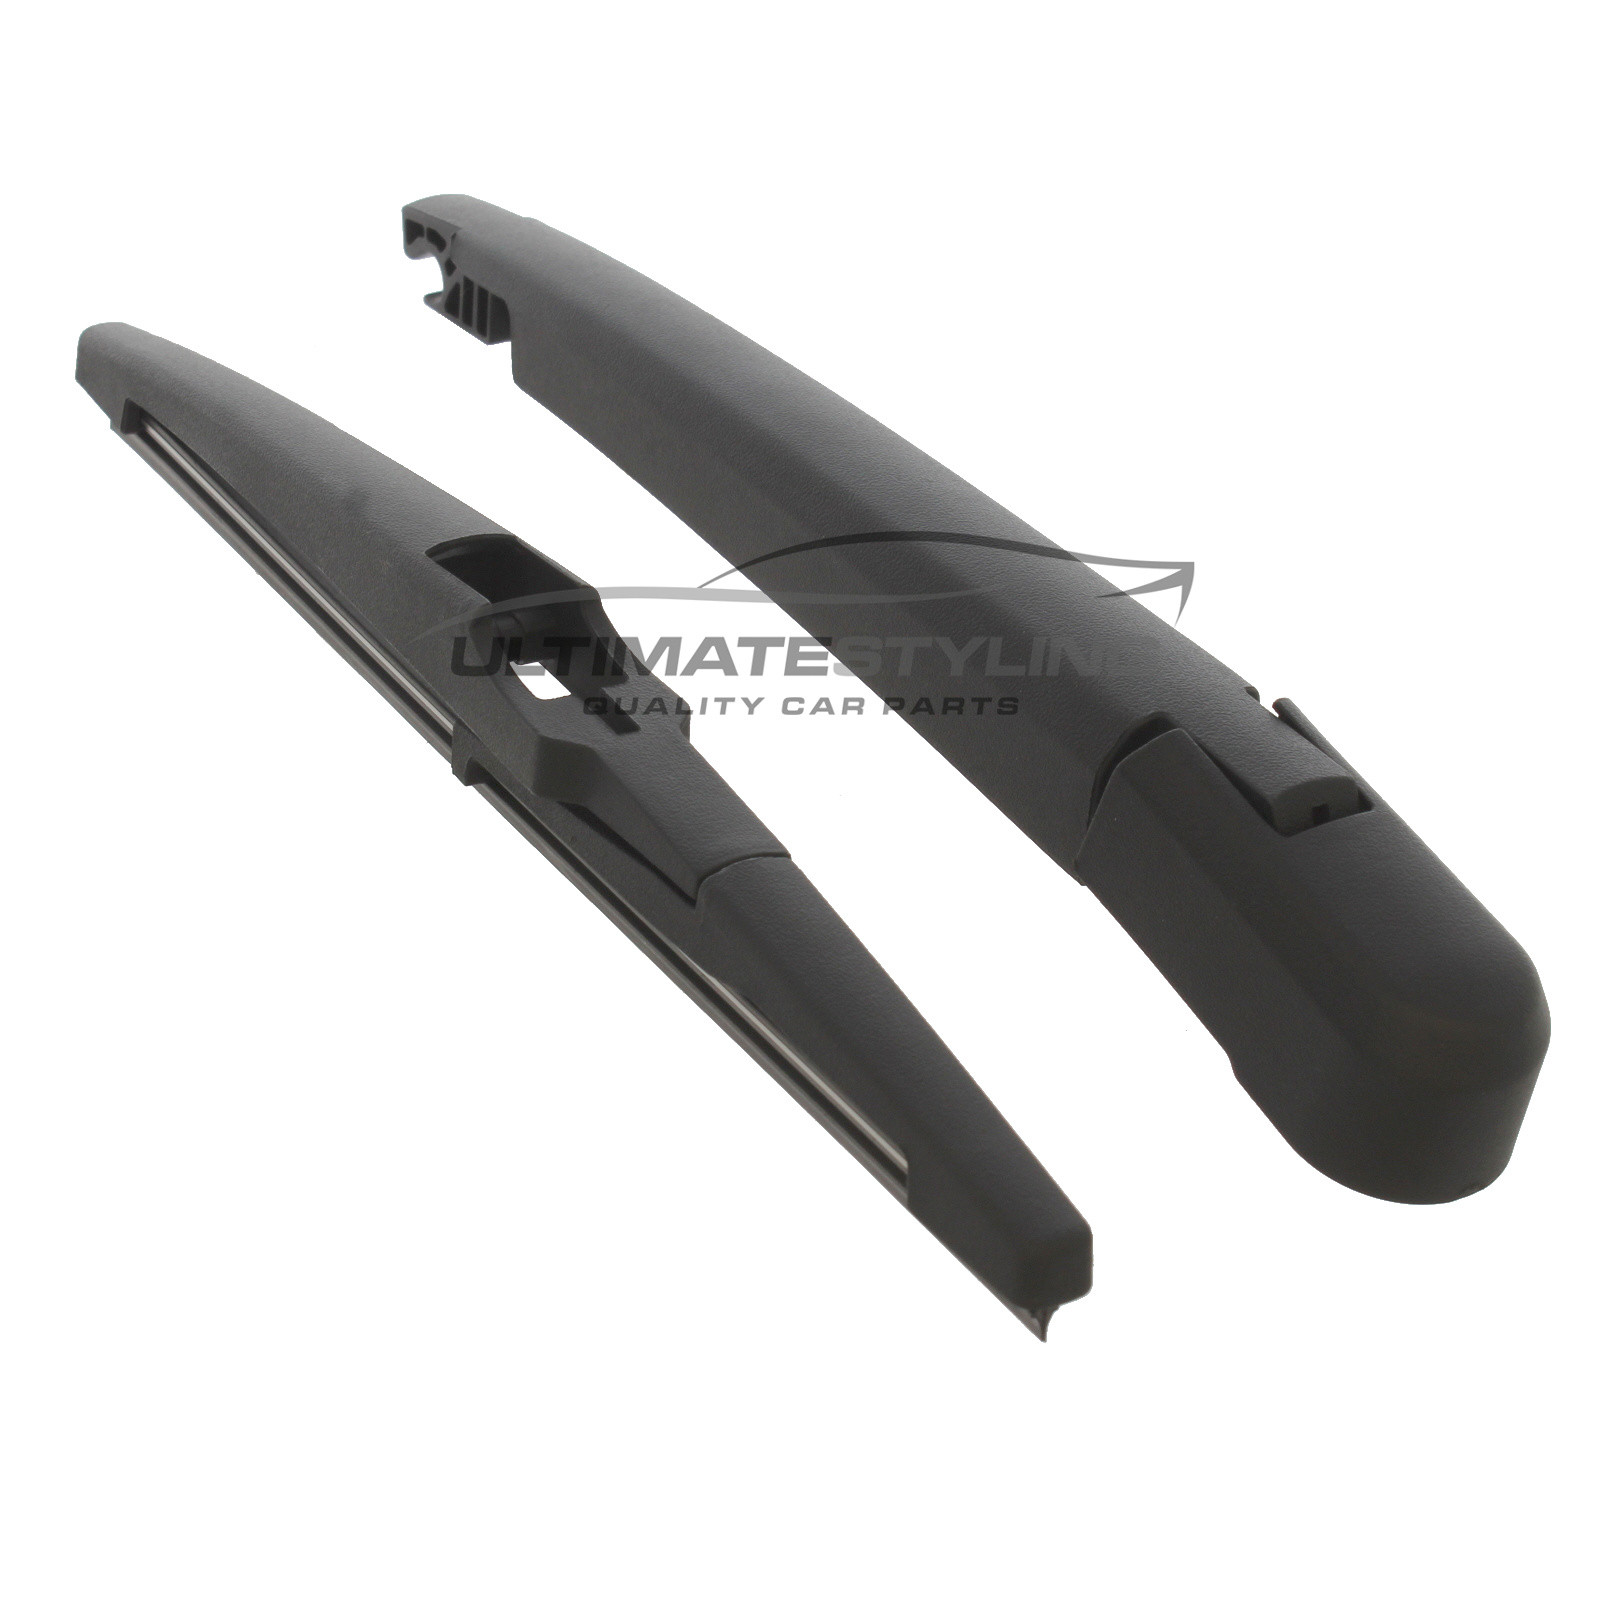 Rear Wiper Arm & Blade Set for Vauxhall Insignia